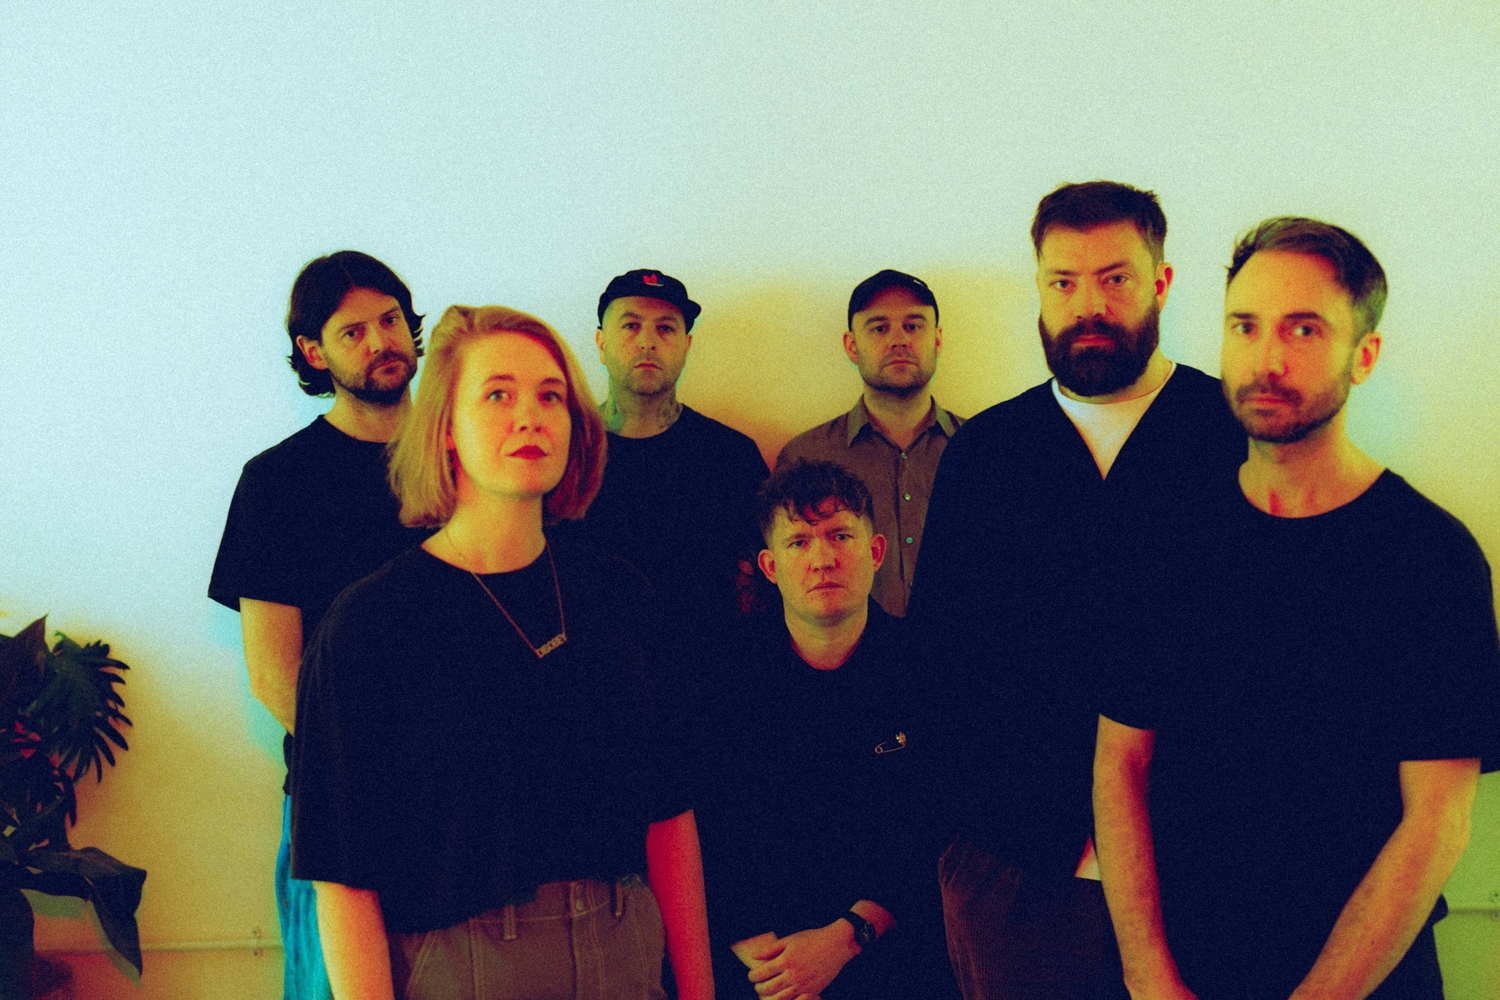 Los Campesinos! announce seventh album 'All Hell'